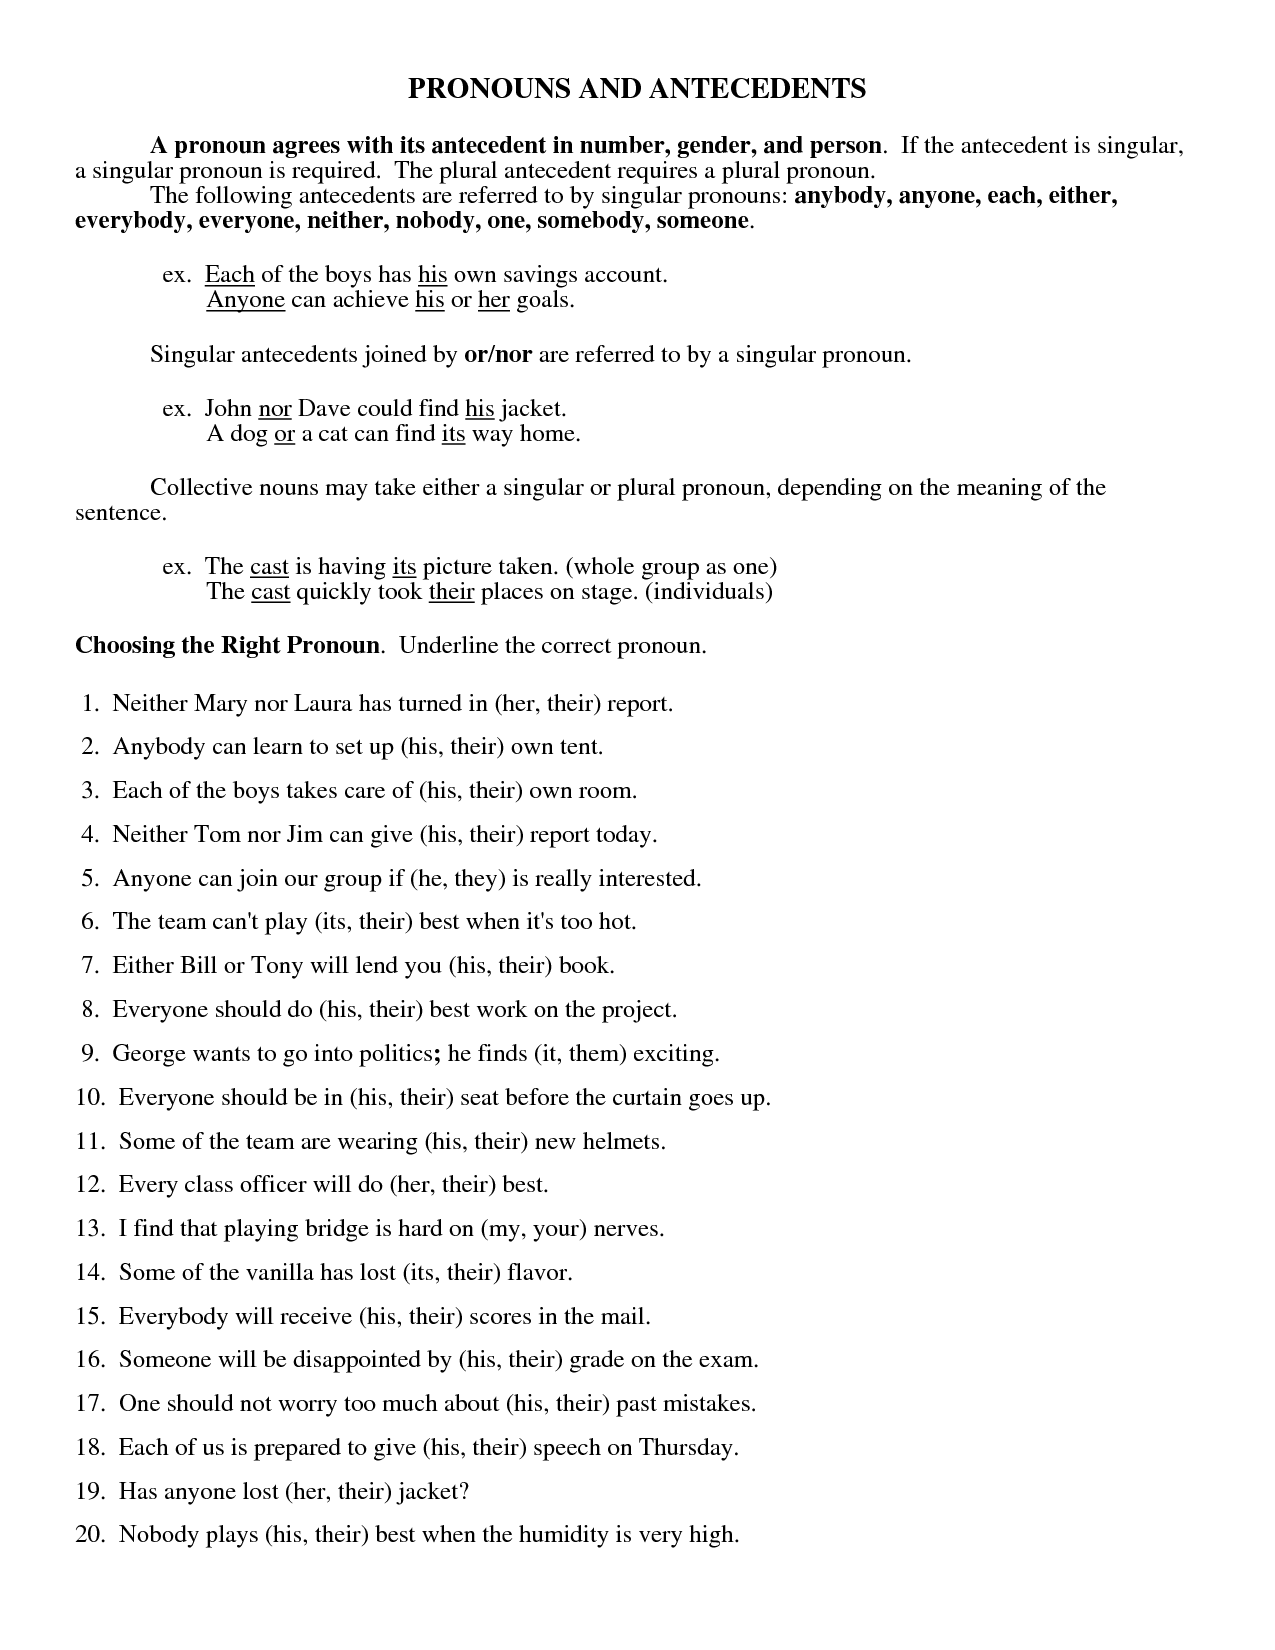 15 Best Images Of Pronouns Worksheets With Answers Subject Pronouns Worksheets Demonstrative